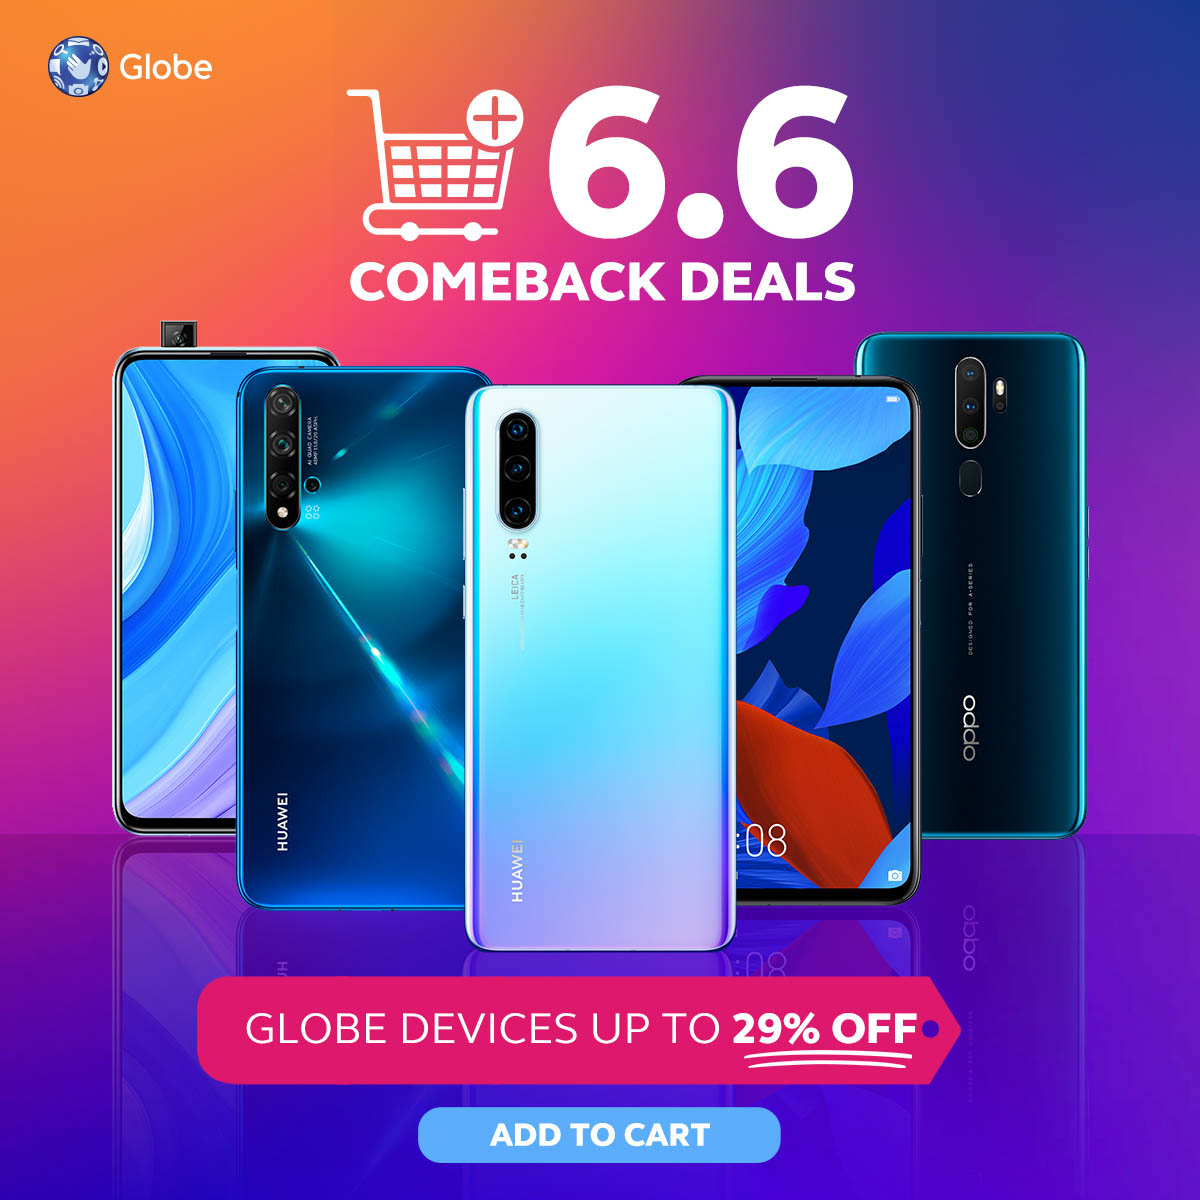 Globe offers awesome discounts at the 6.6 comeback deals